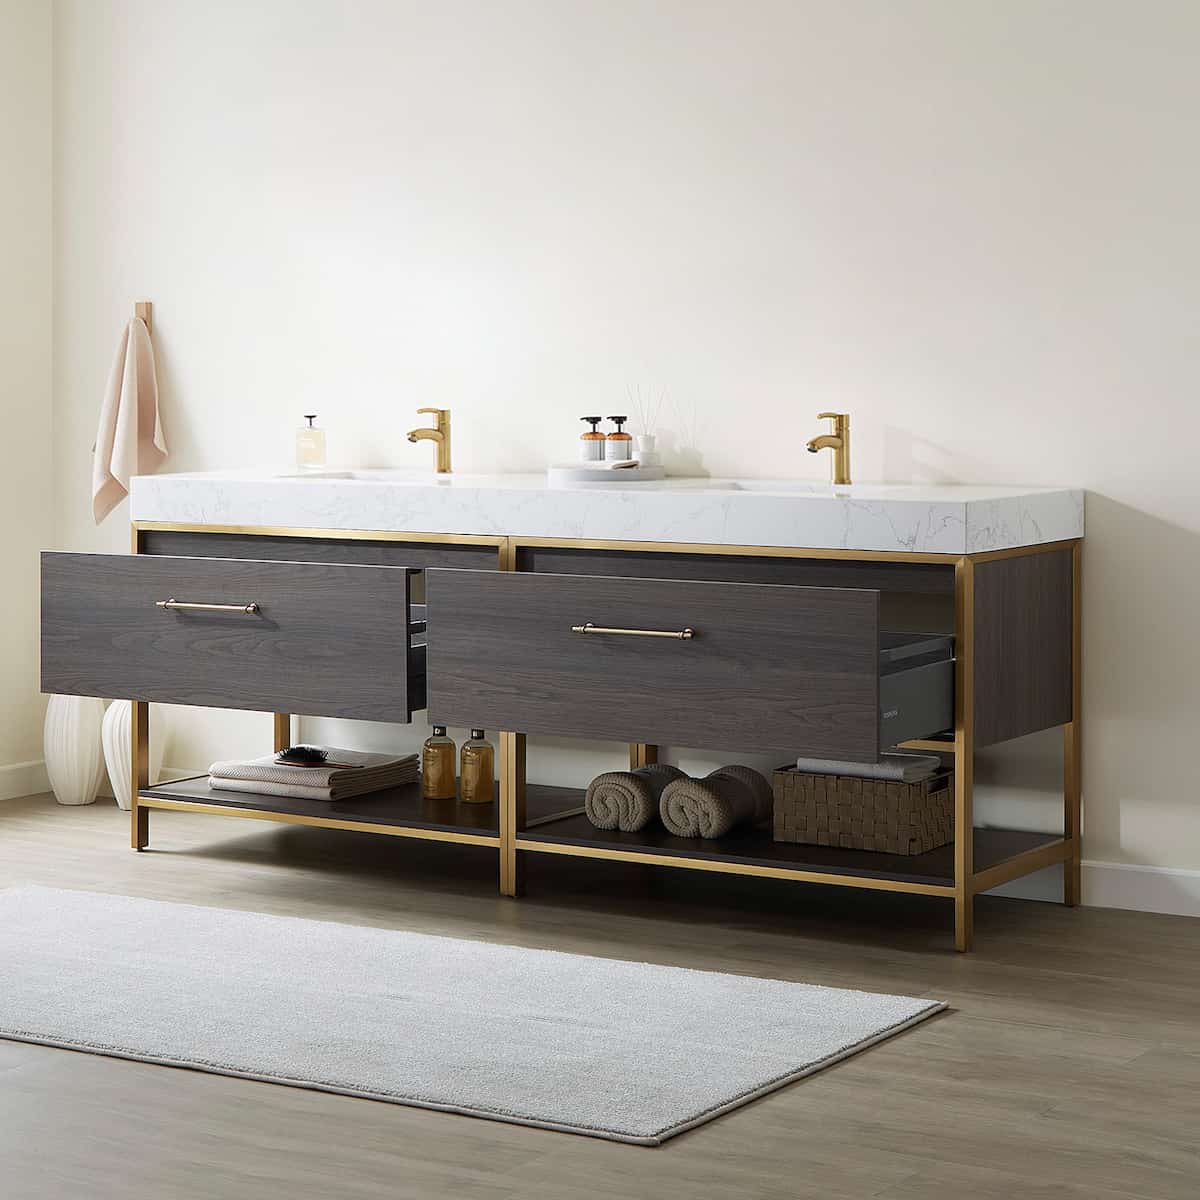 Vinnova Palma 84 Inch Freestanding Double Sink Bath Vanity in Suleiman Oak with White Composite Grain Stone Without Mirror Drawers 701284G-SO-GW-NM